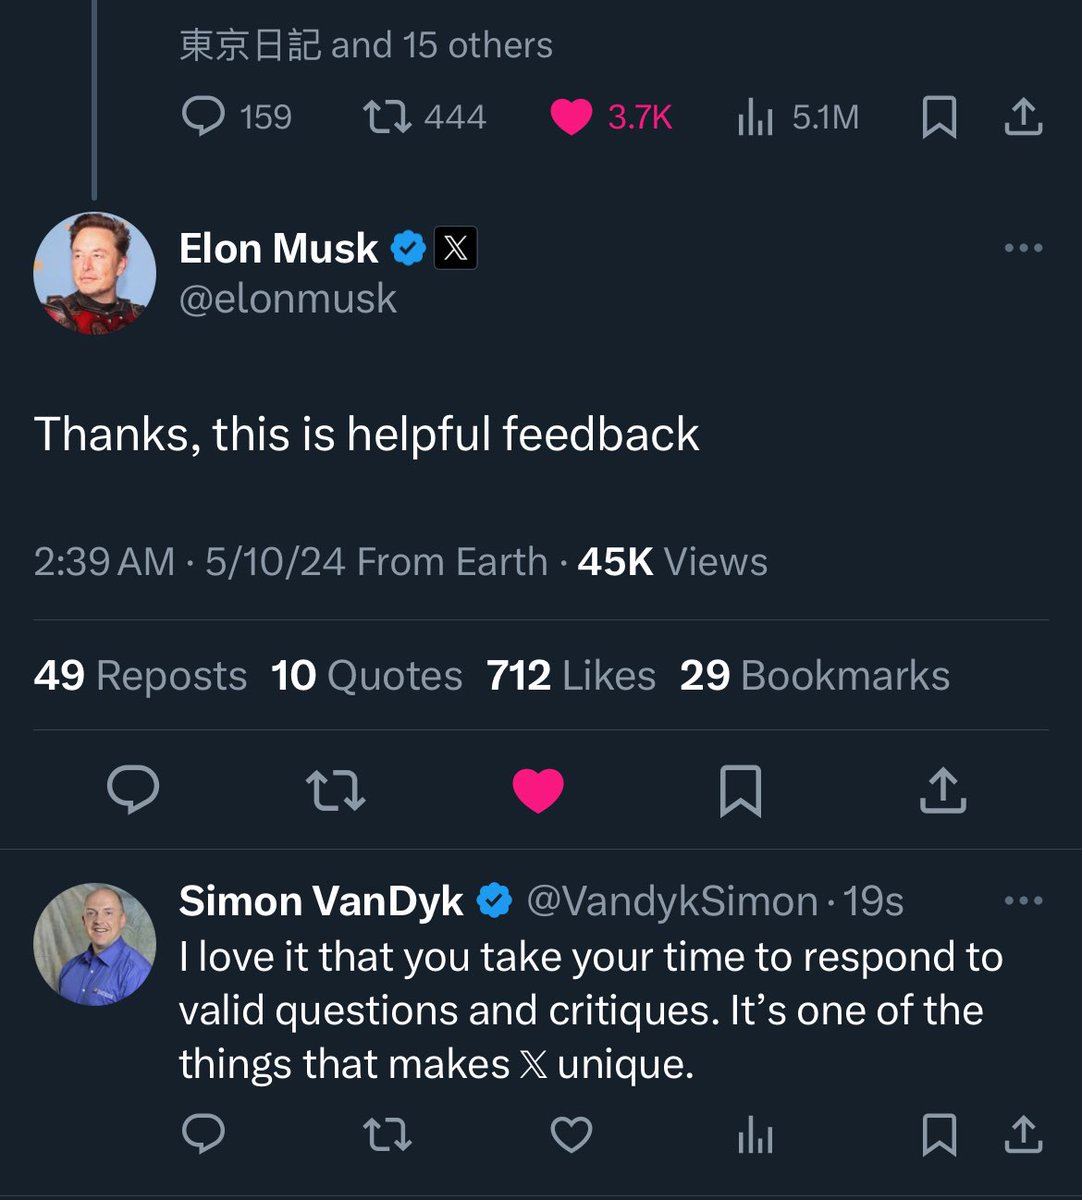 @sindenekoninaru @elonmusk @tokyoeveryday @inc_heavensgate @kabuki_bungaku Congrats. You got a reply and hopefully Elon can help you out. 

Only on 𝕏 does the owner actually respond to feedback like this. It’s amazing.